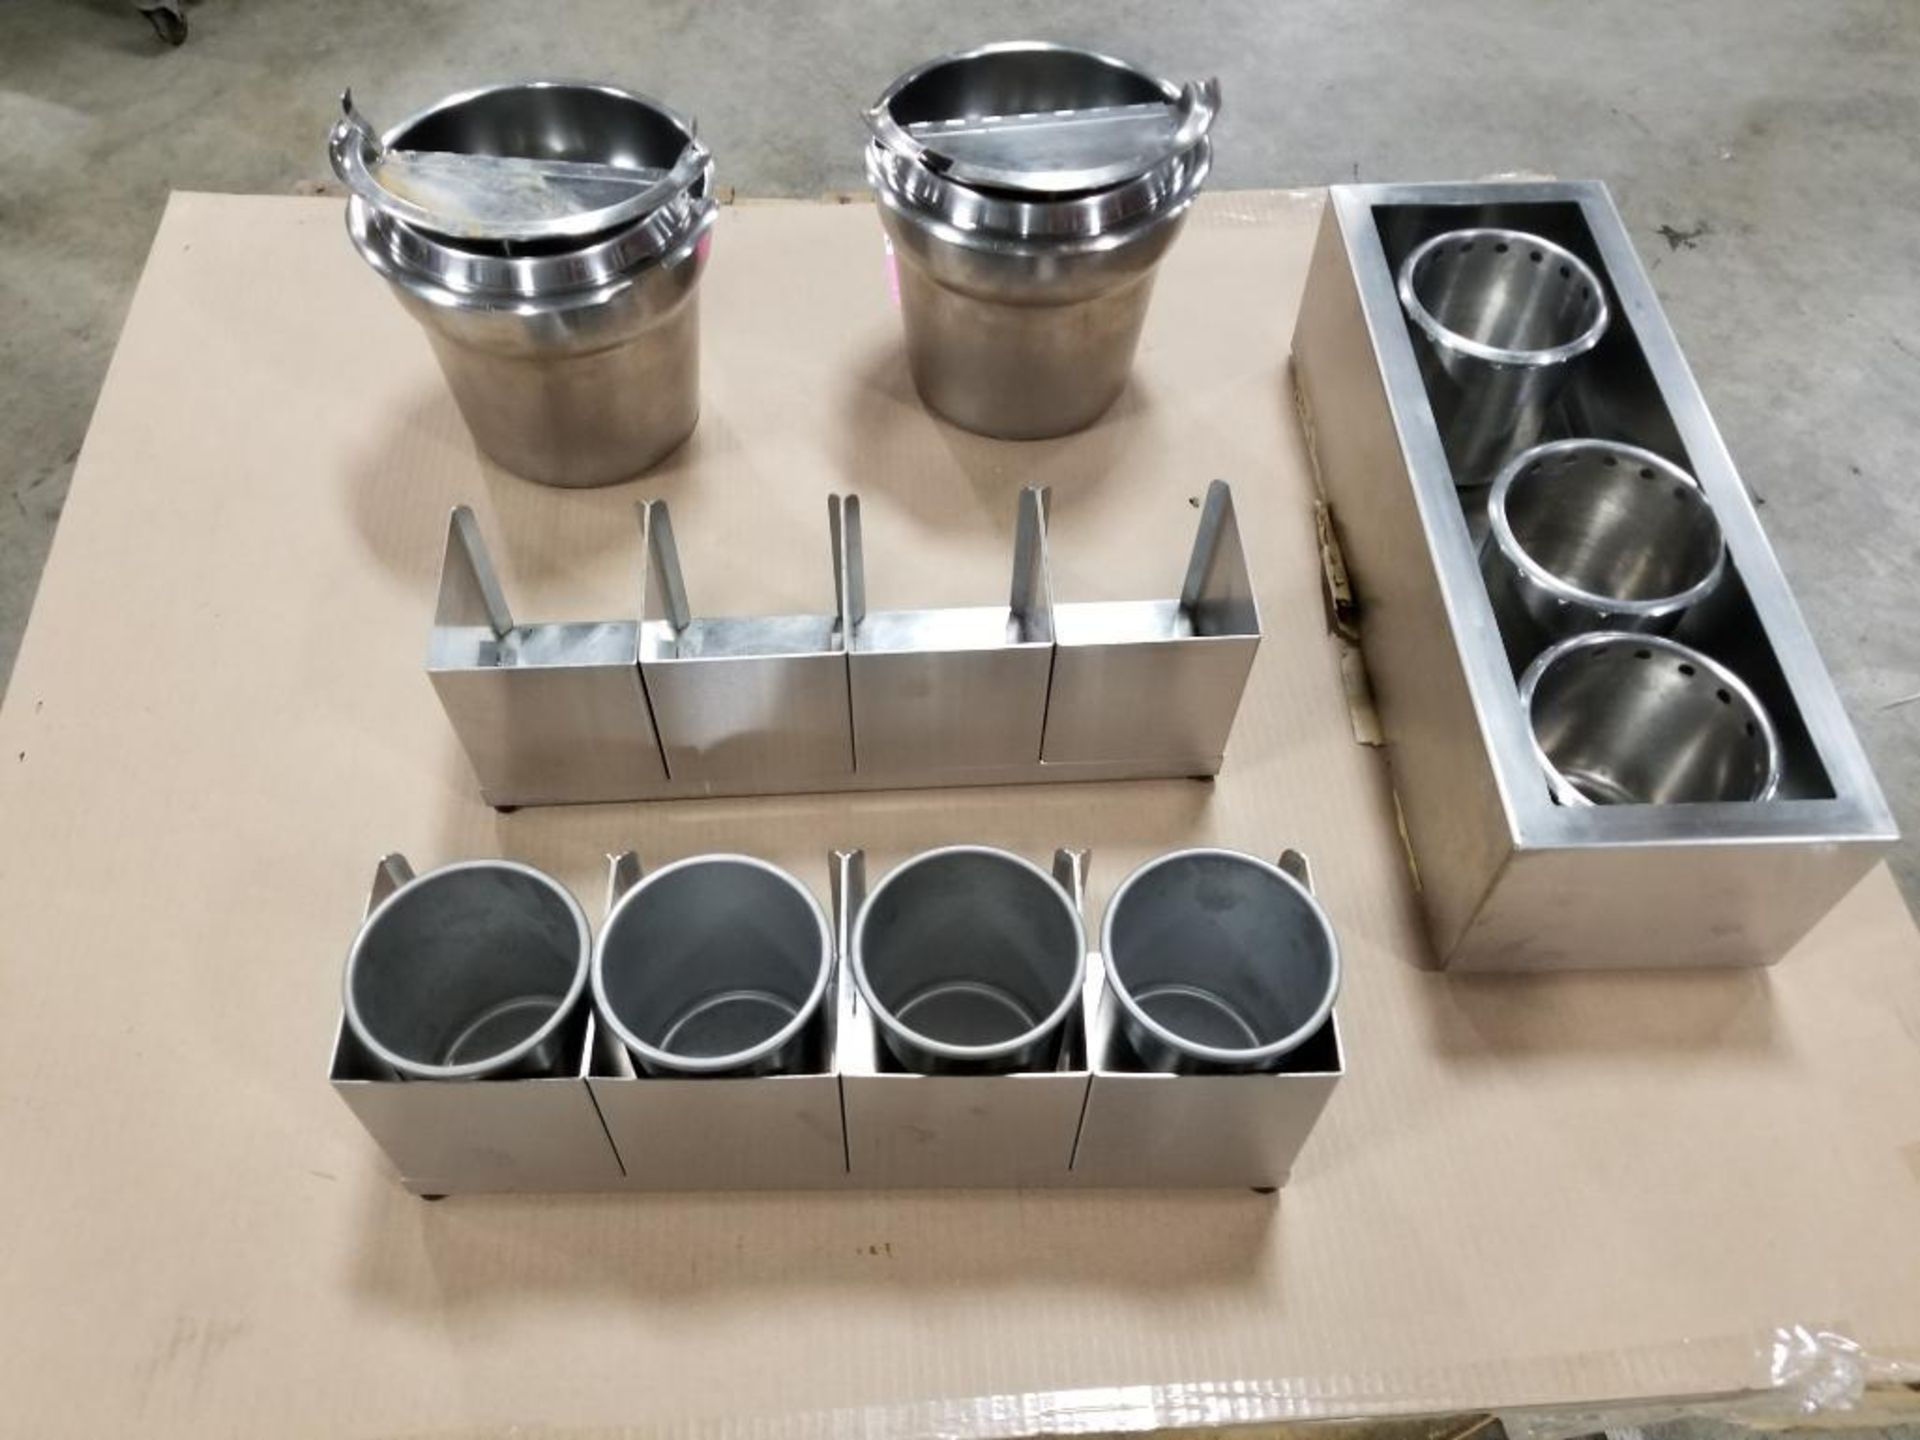 Stainless steel steam table and containers. - Image 6 of 16